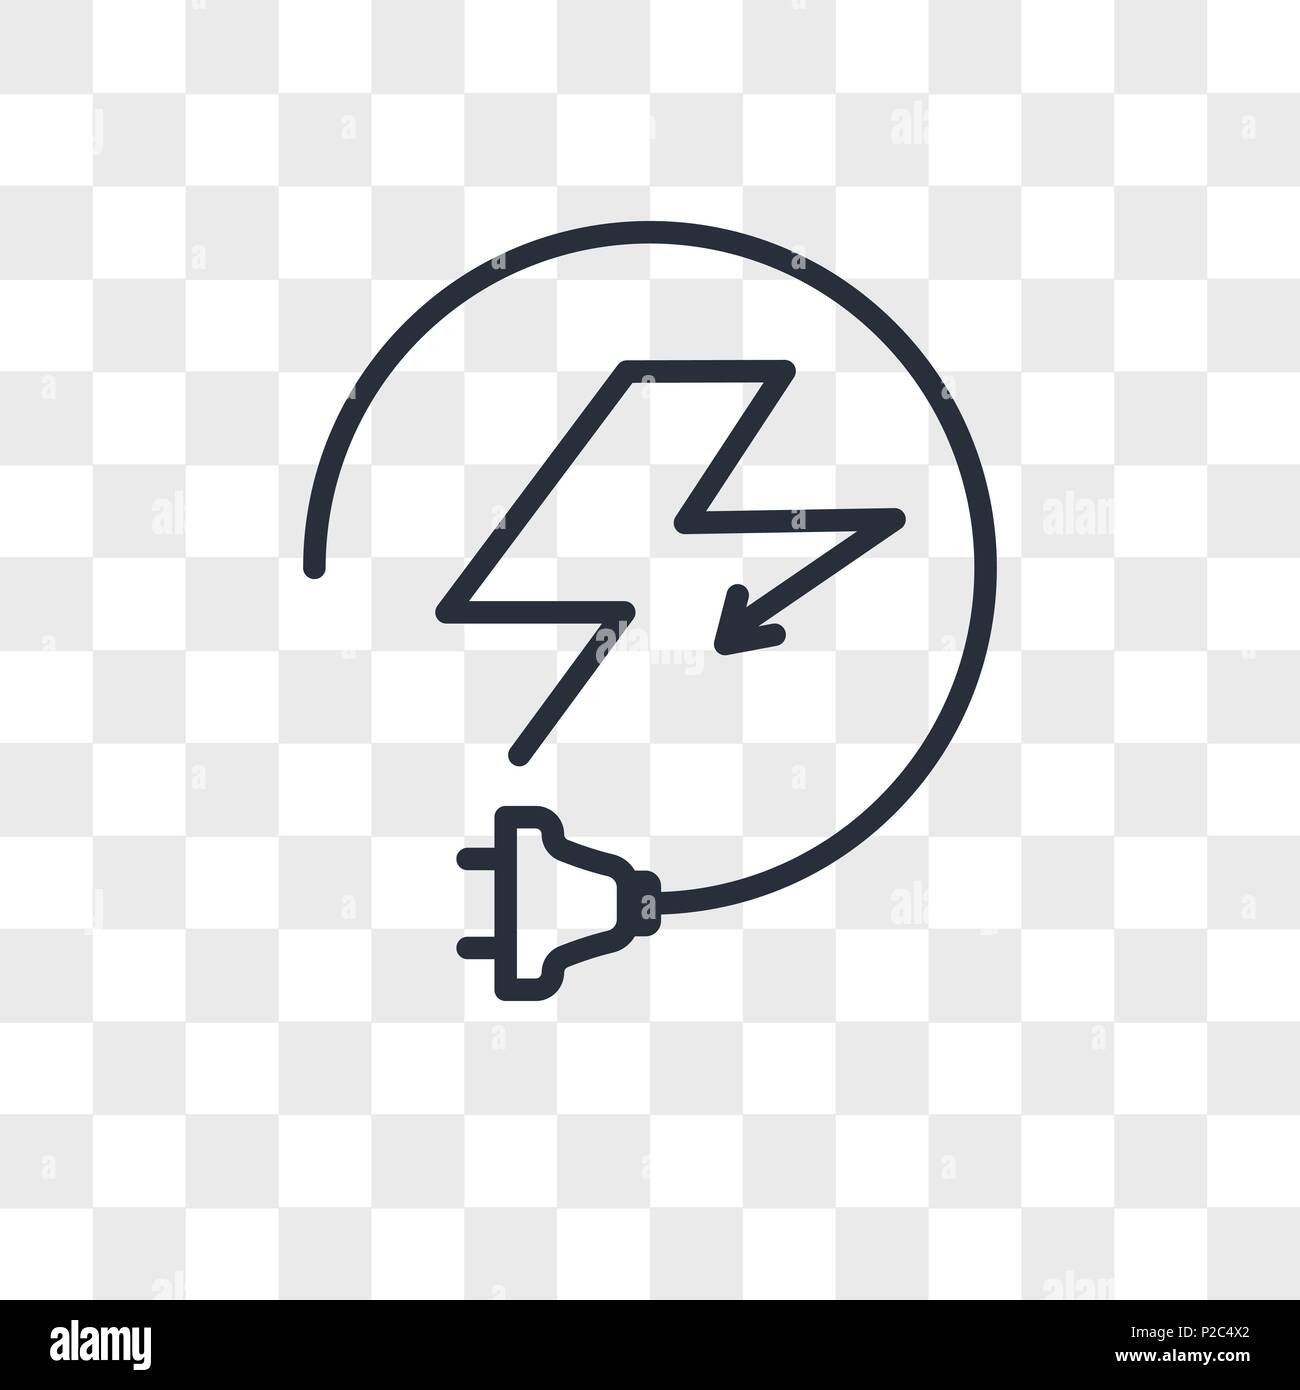 Electricity Vector Icon Isolated On Transparent Background